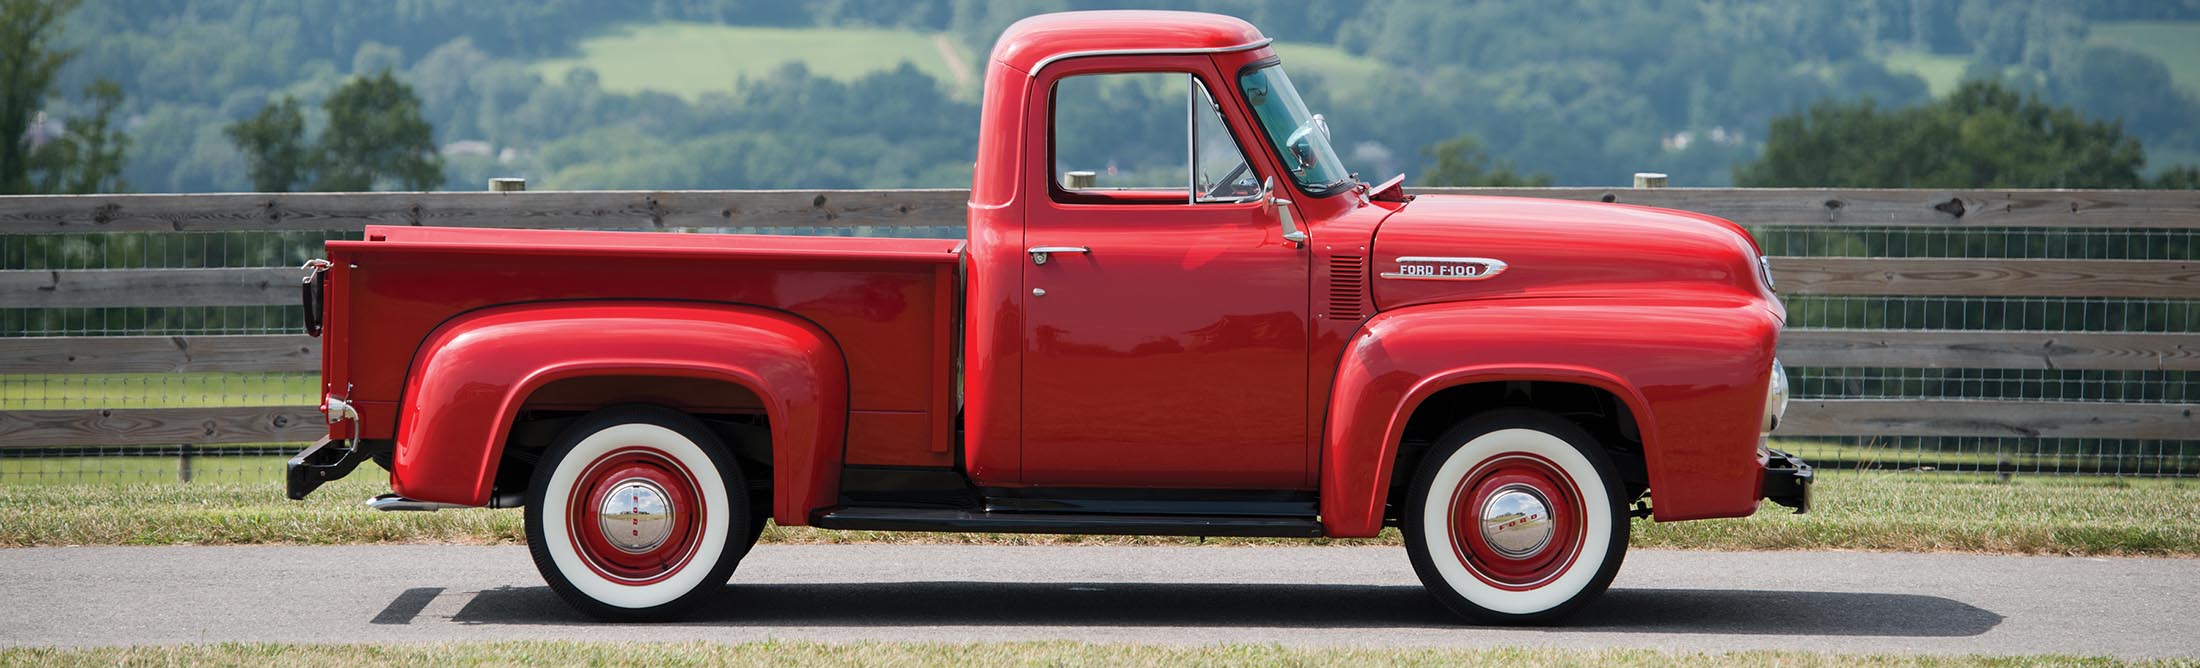 1956 ford f100 pick up for sale